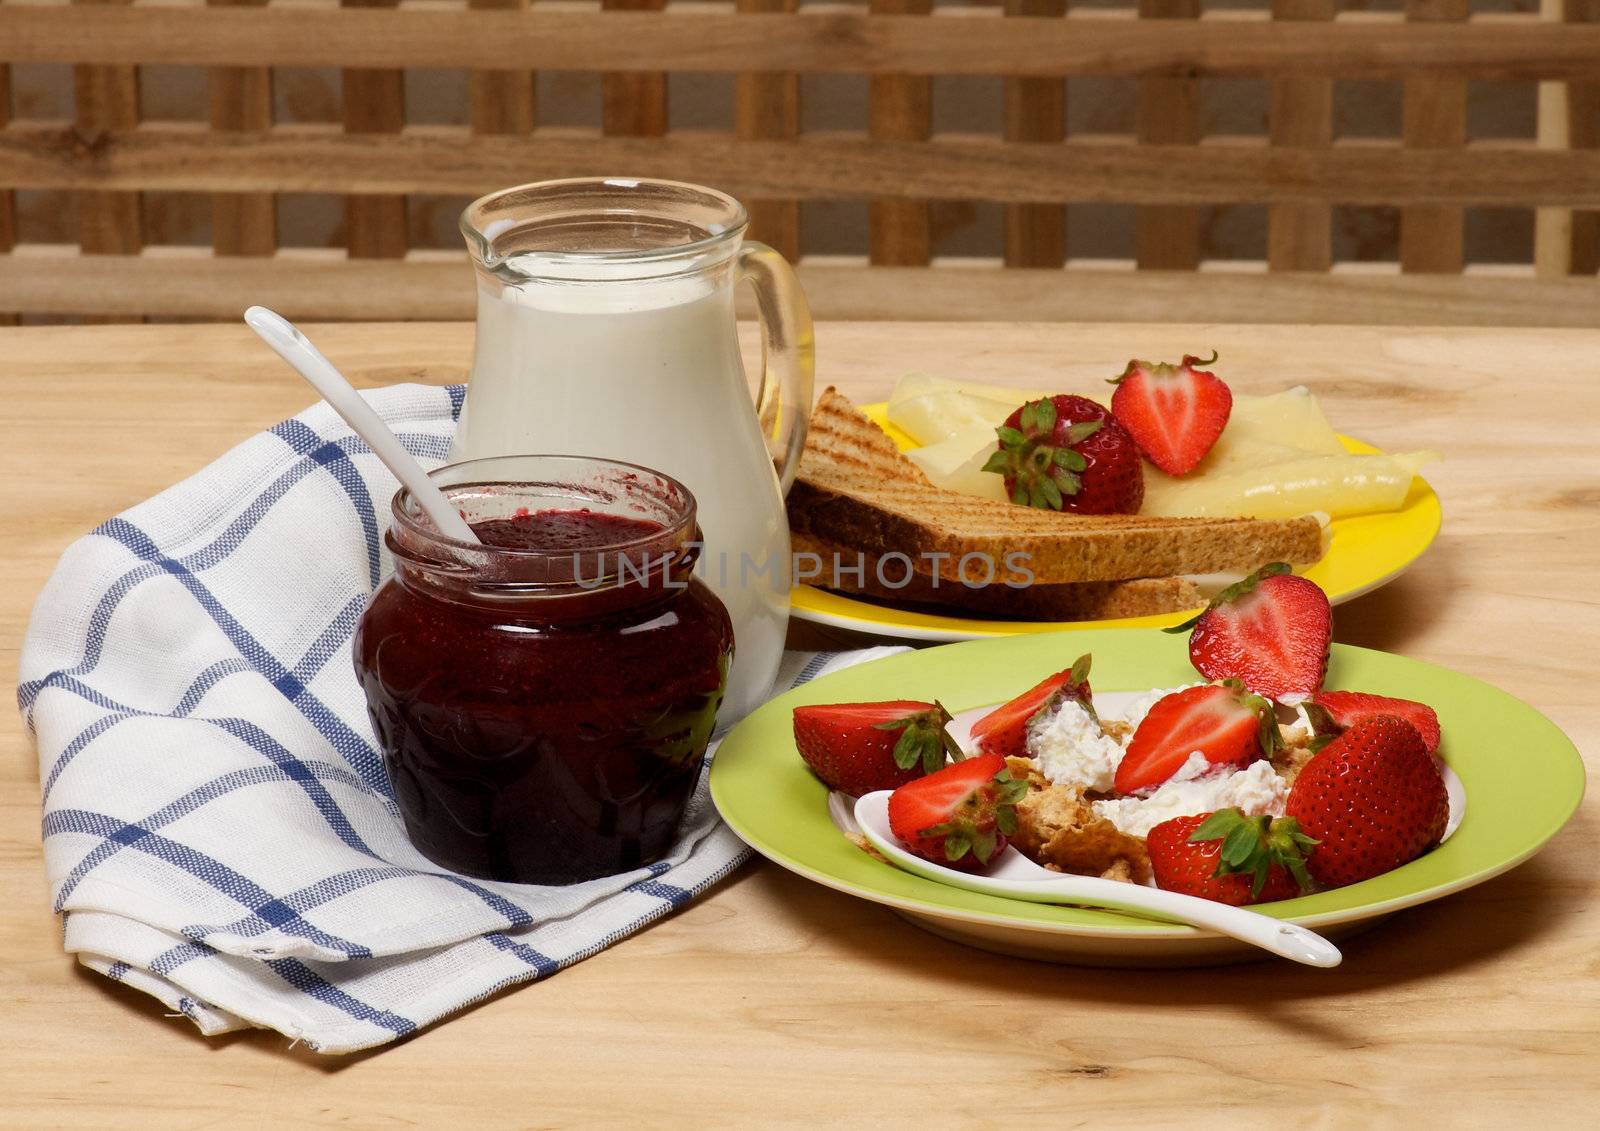 Village Breakfast of Toasts, Strawberries, Jam, Milk and Curds close up on wooden background